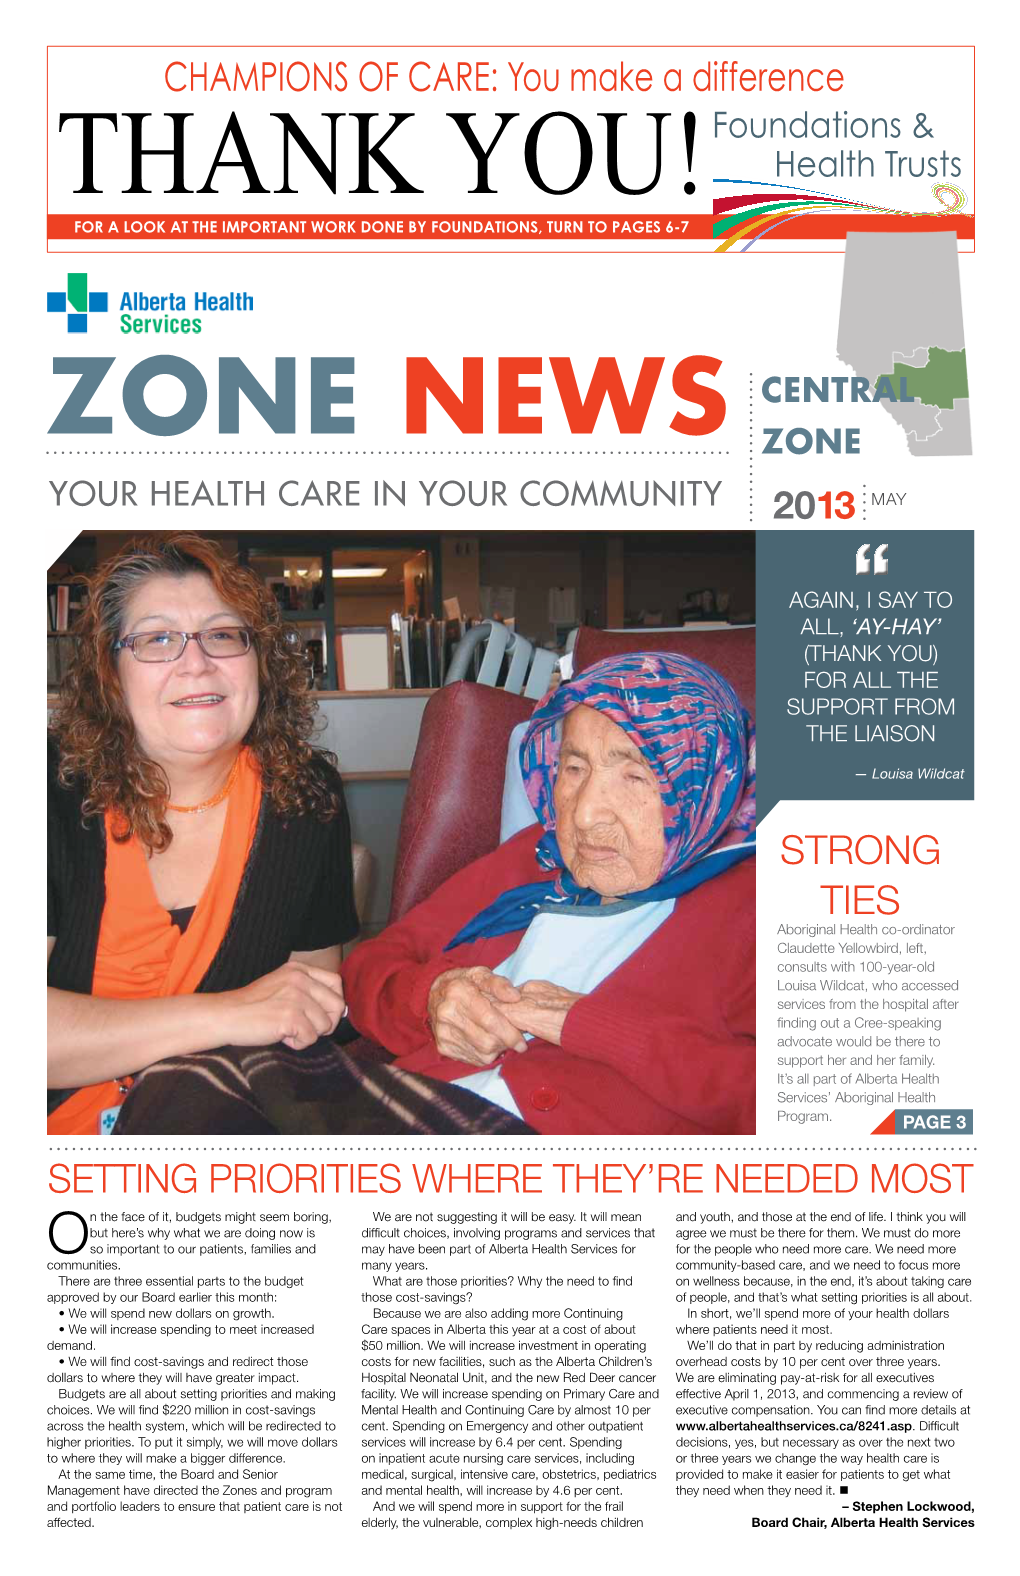 CENTRAL Zone NEWS Zone Your Health Care in Your Community 2013 May